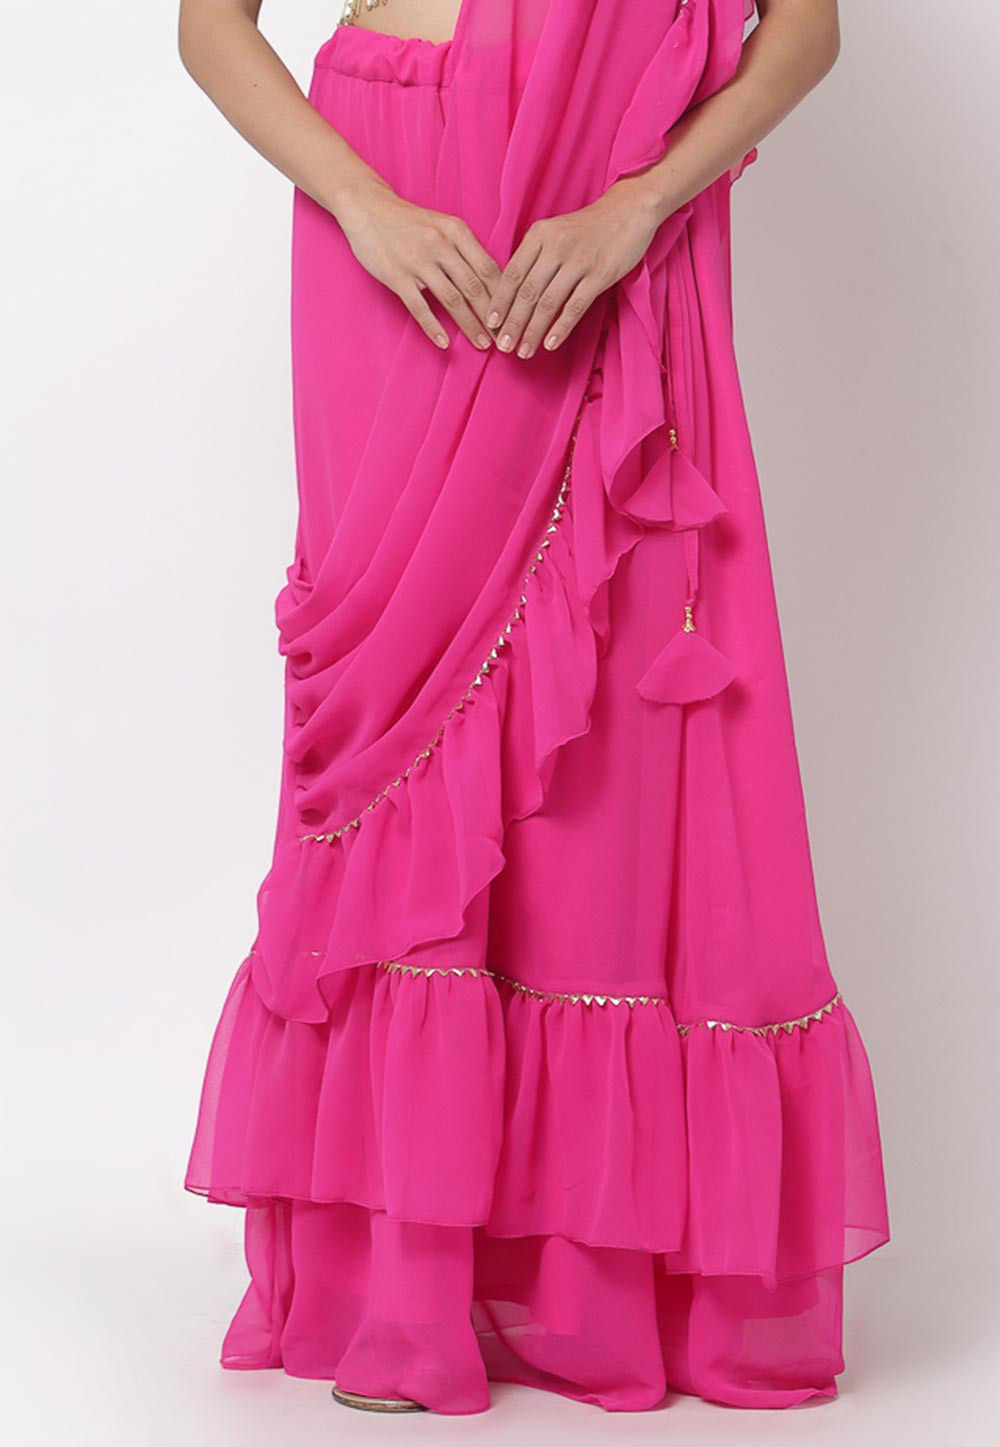 Embellished Georgette Ruffled Skirt with Attached Dupatta in Fuchsia ...